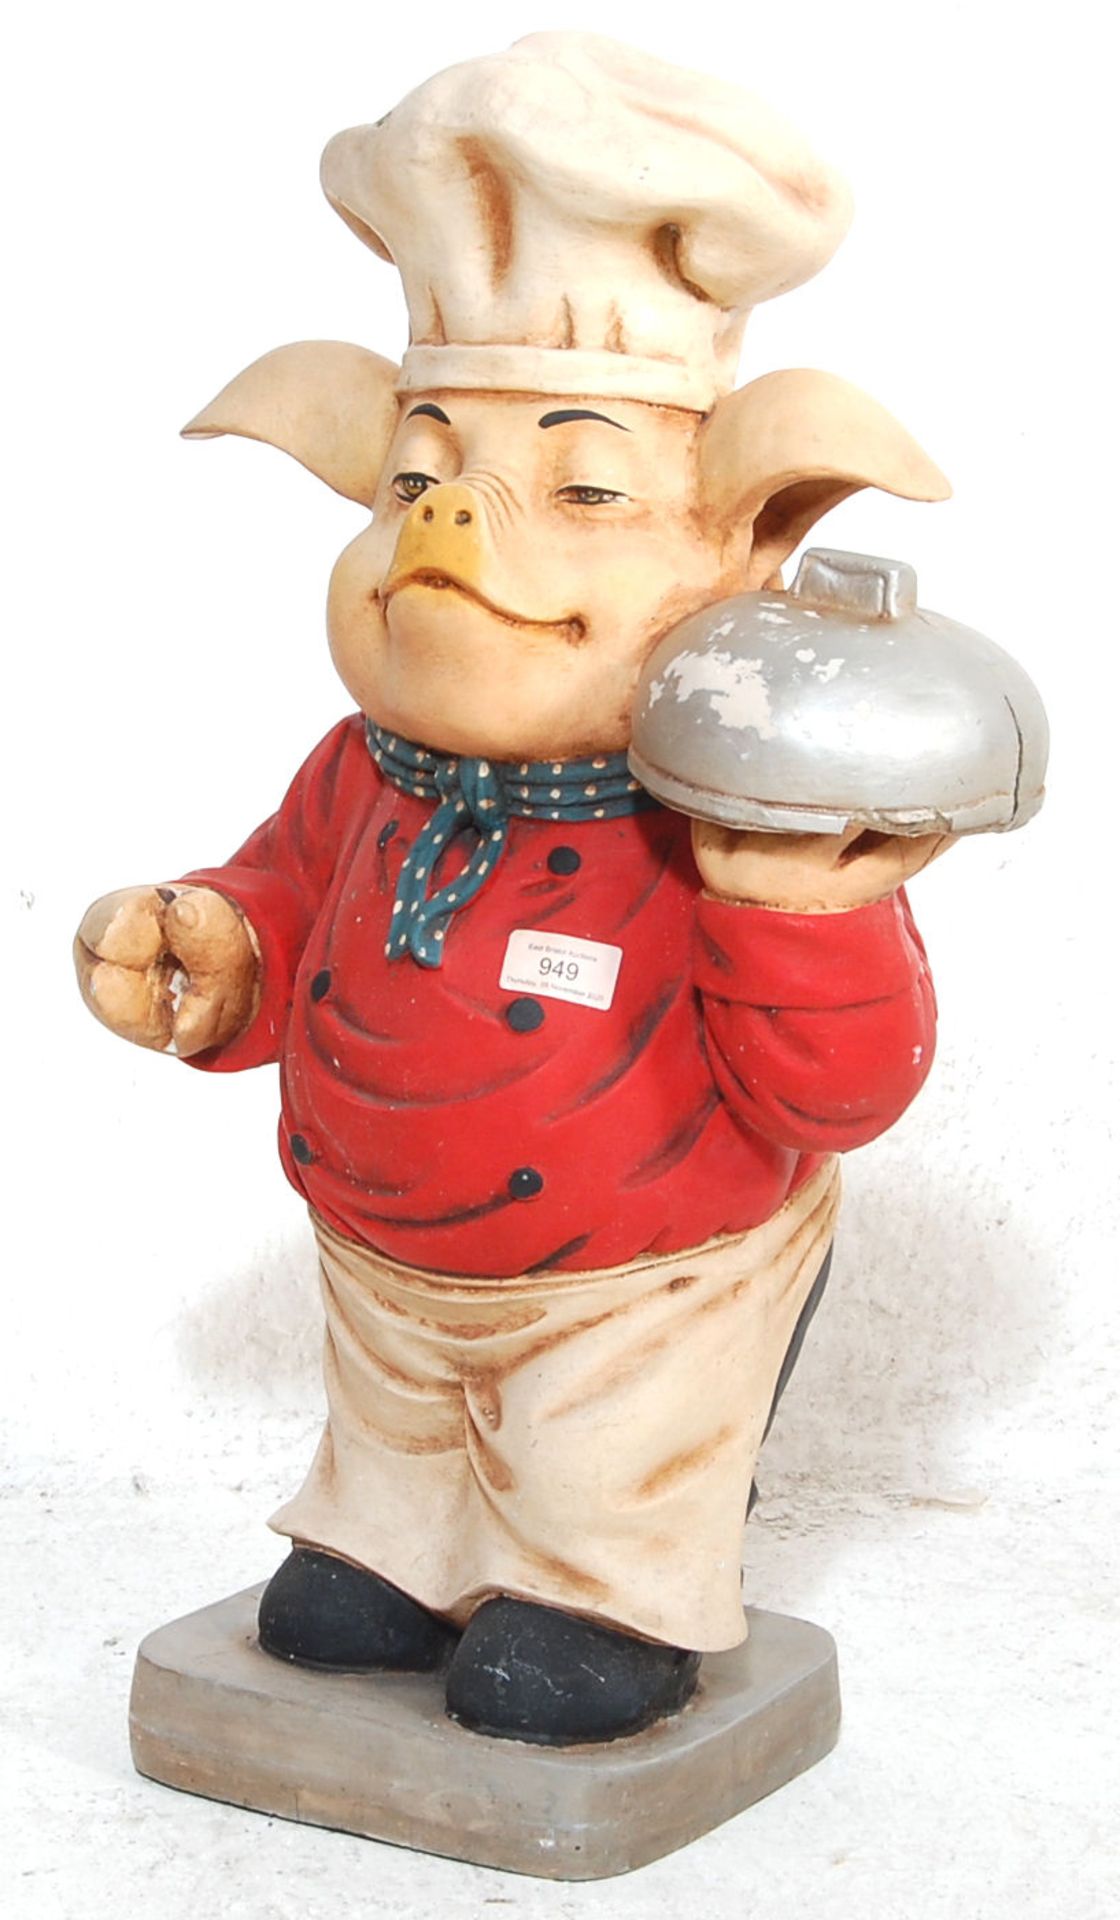 A RETRO 20TH CENTURY ADVERTISING POINT OF SALE PIG CHEF